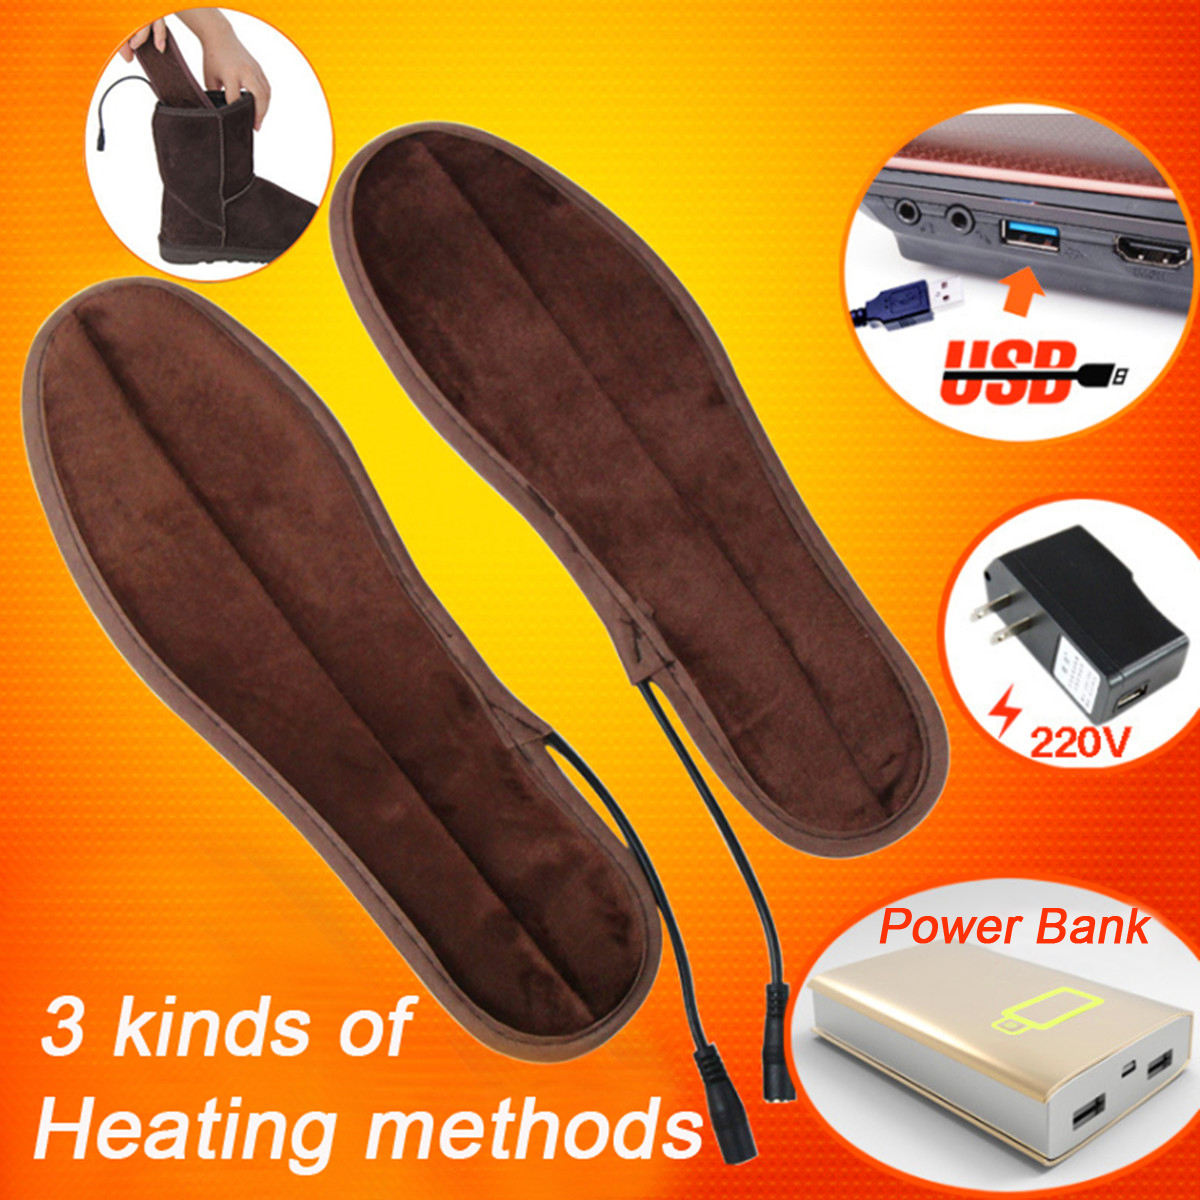 Unisex-USB-Charging-Electric-Heated-Insoles-for-Shoes-Winter-Warmer-Foot-Heating-Insole-Boots-Rechar-1637404-5